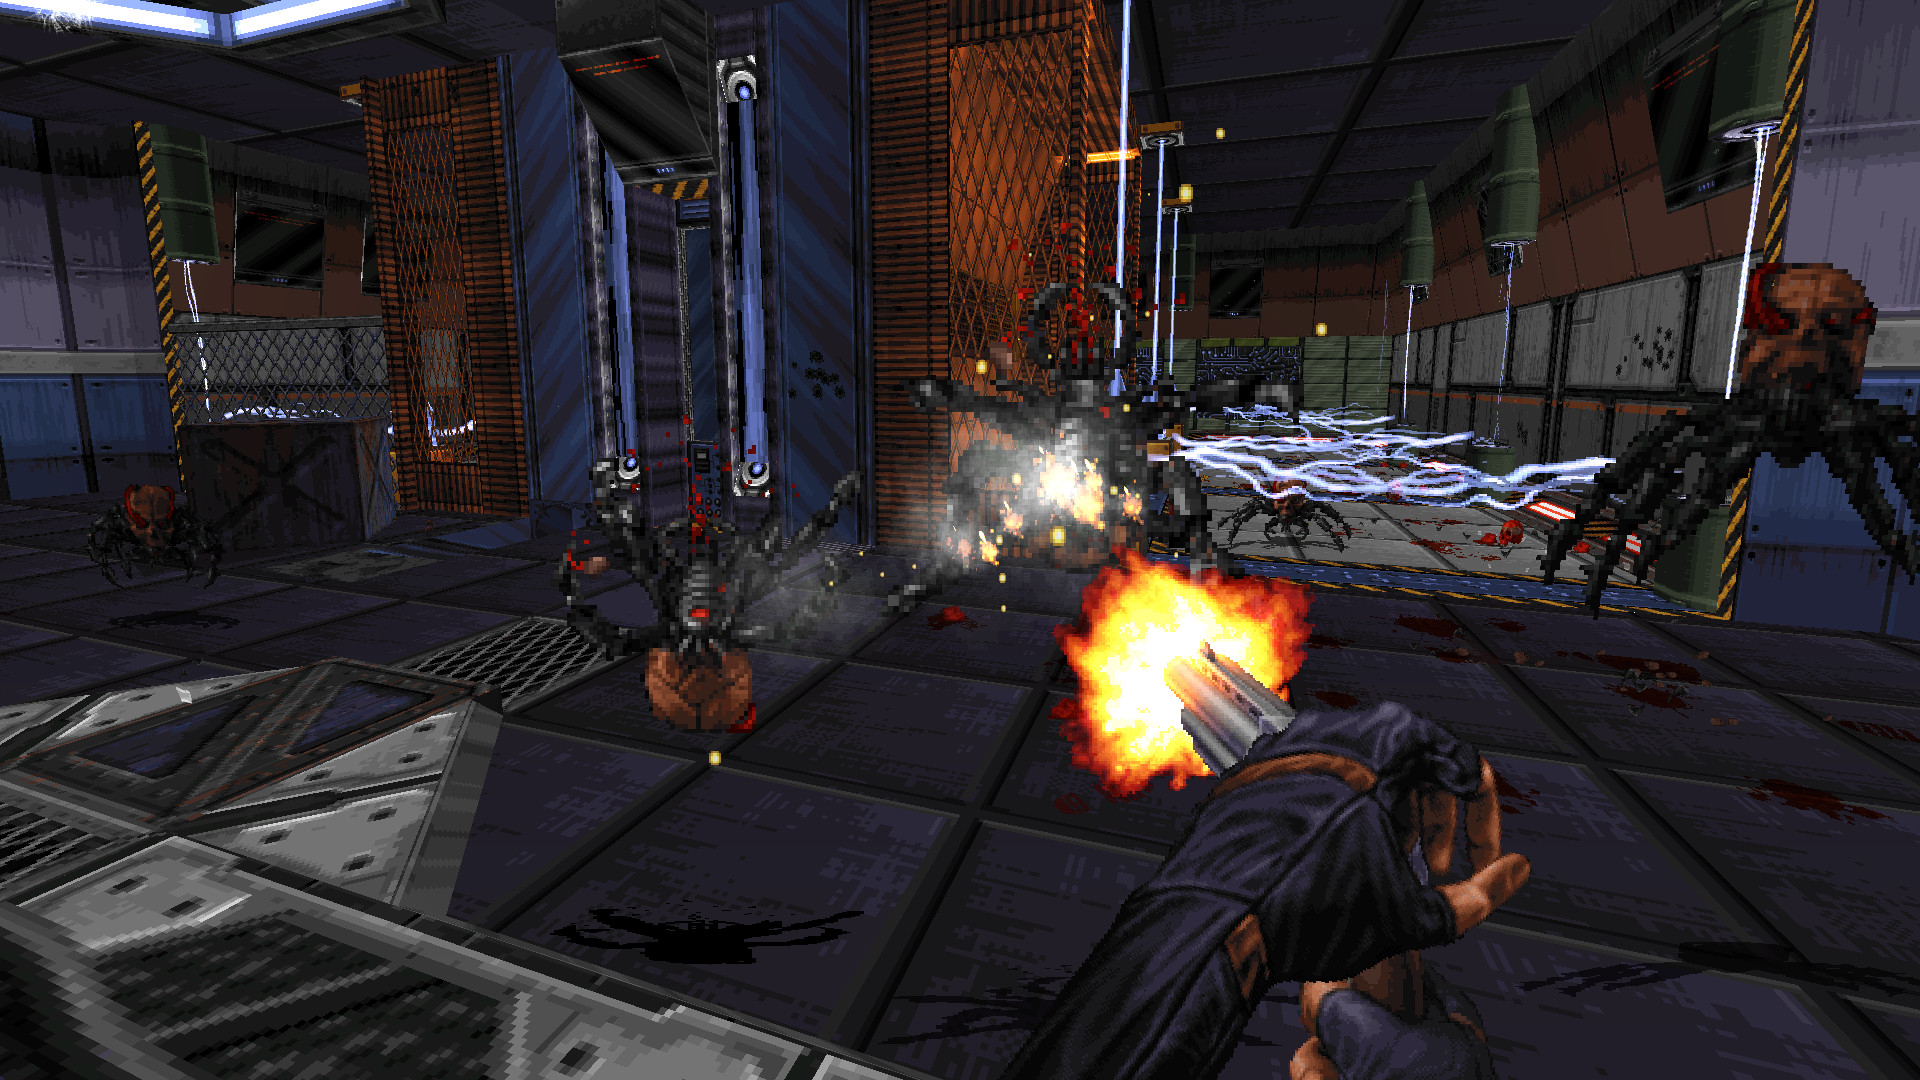 Best retro games: Ion Maiden. Image shows a player shooting an giant spiders in a futuristic building.